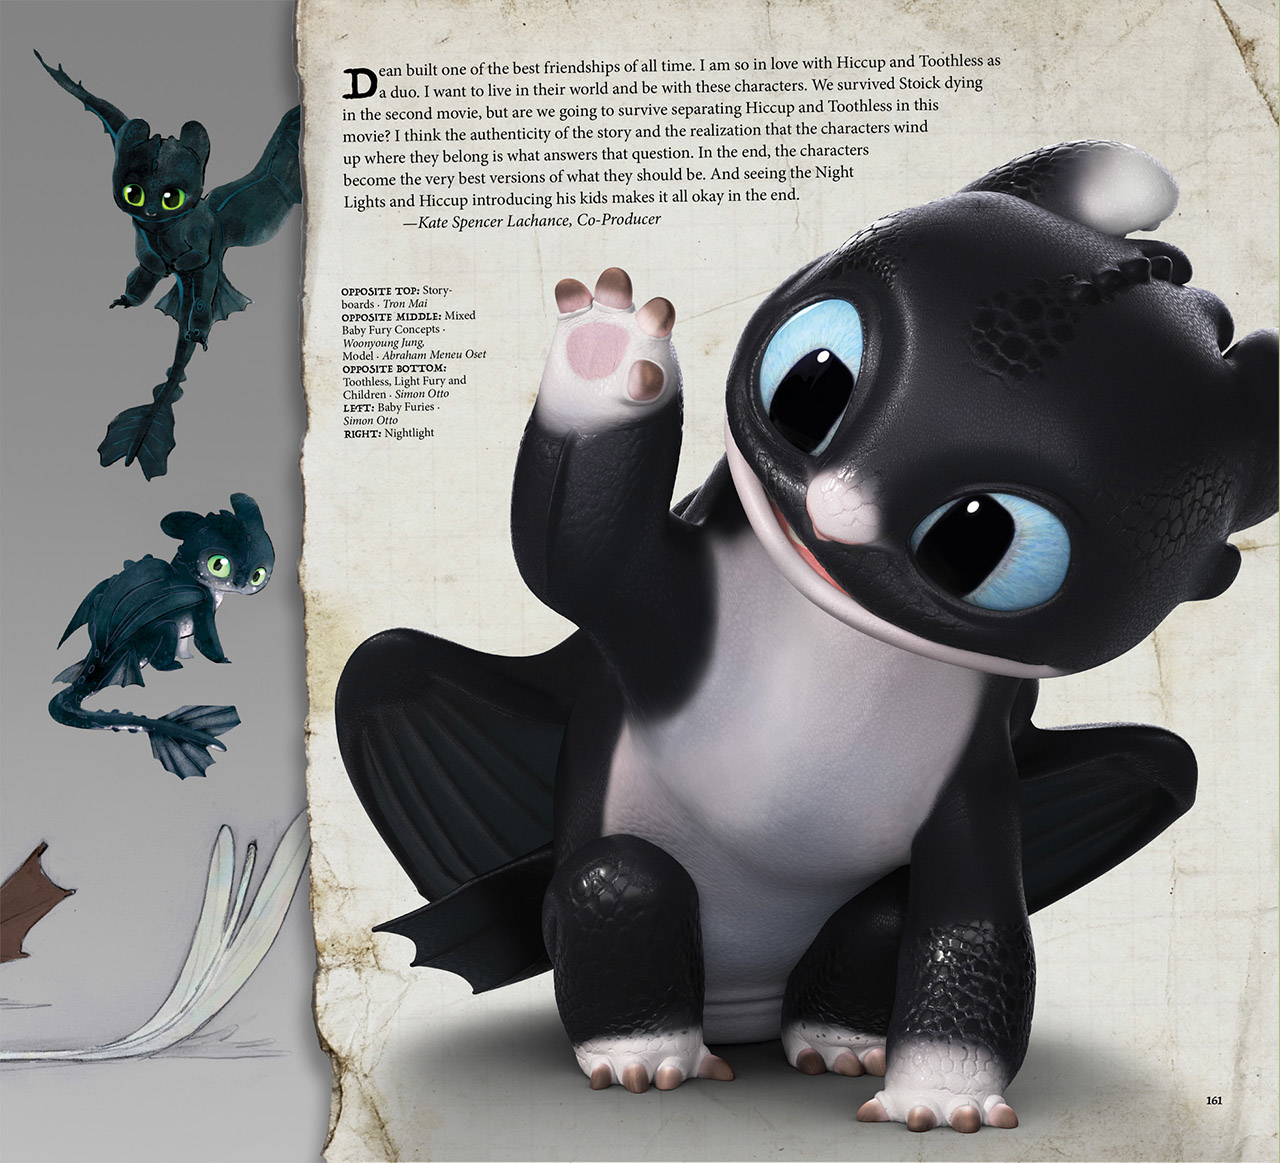 Artbook on "How to Train Your Dragon 3" is available for